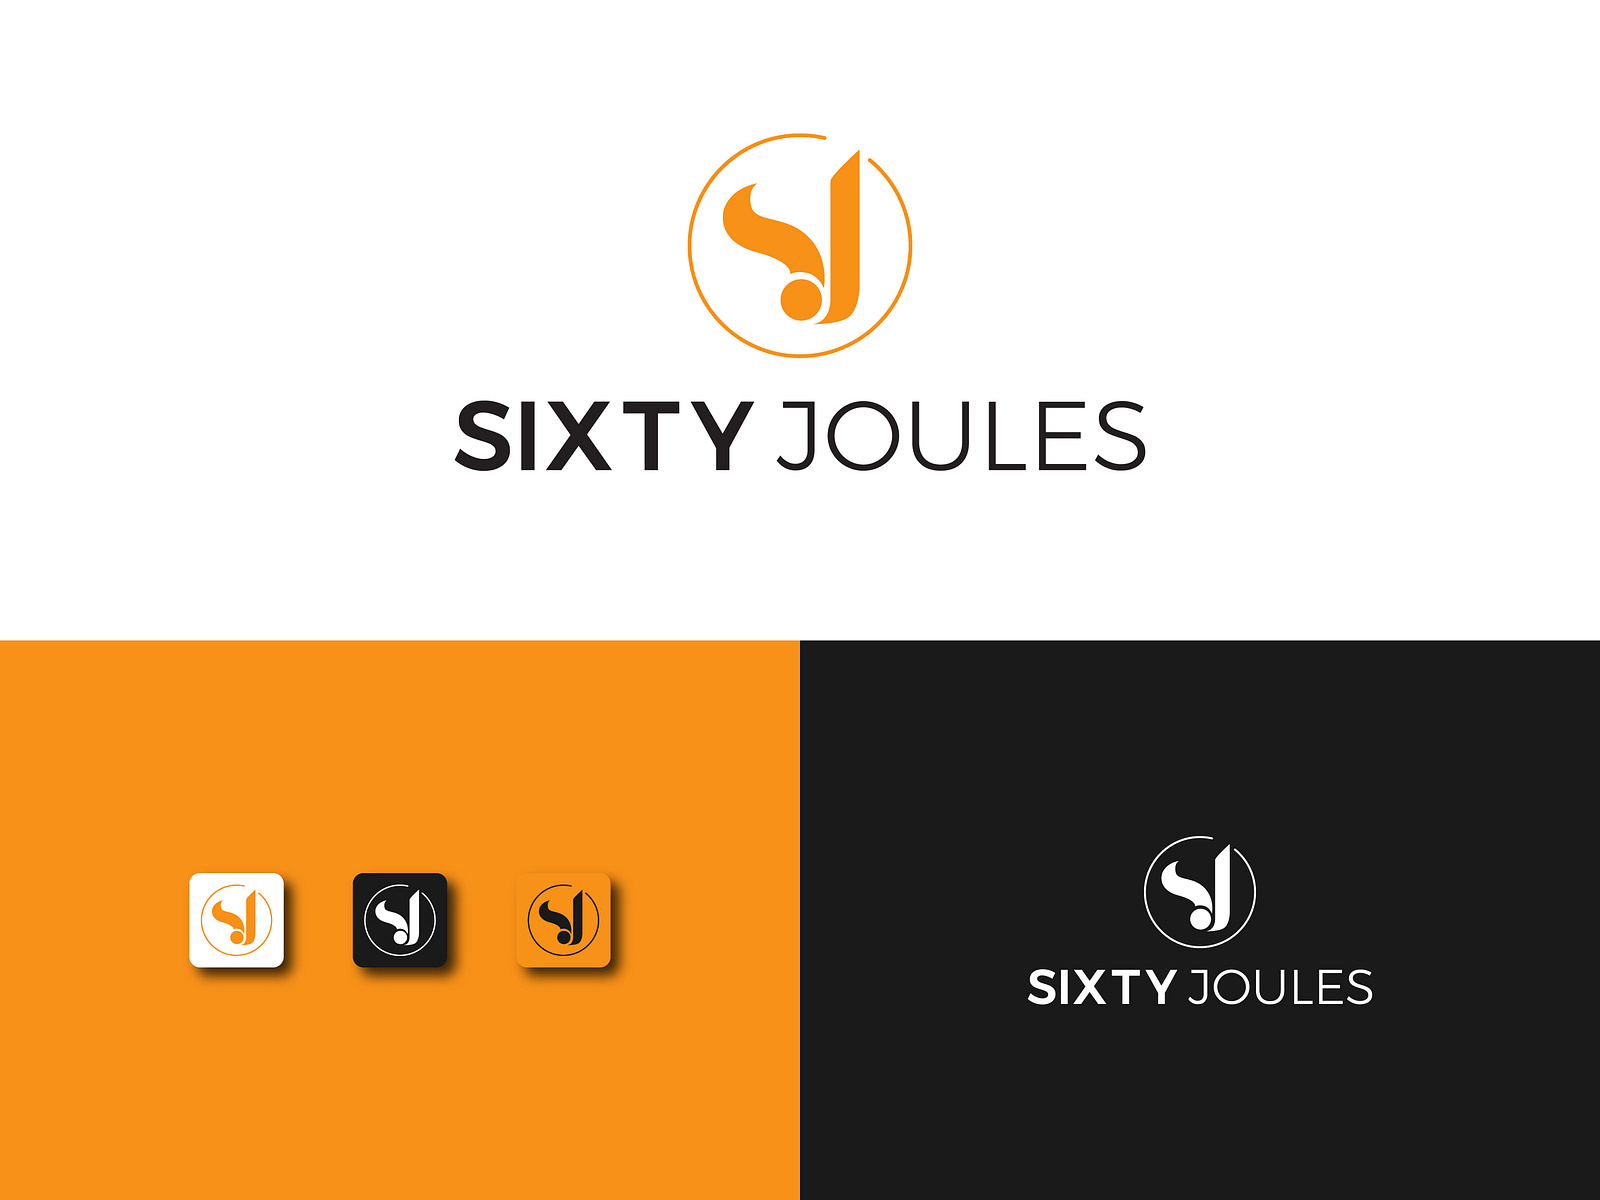 Sixty Joules - Logo design by Md. Ehsanul Huq on Dribbble